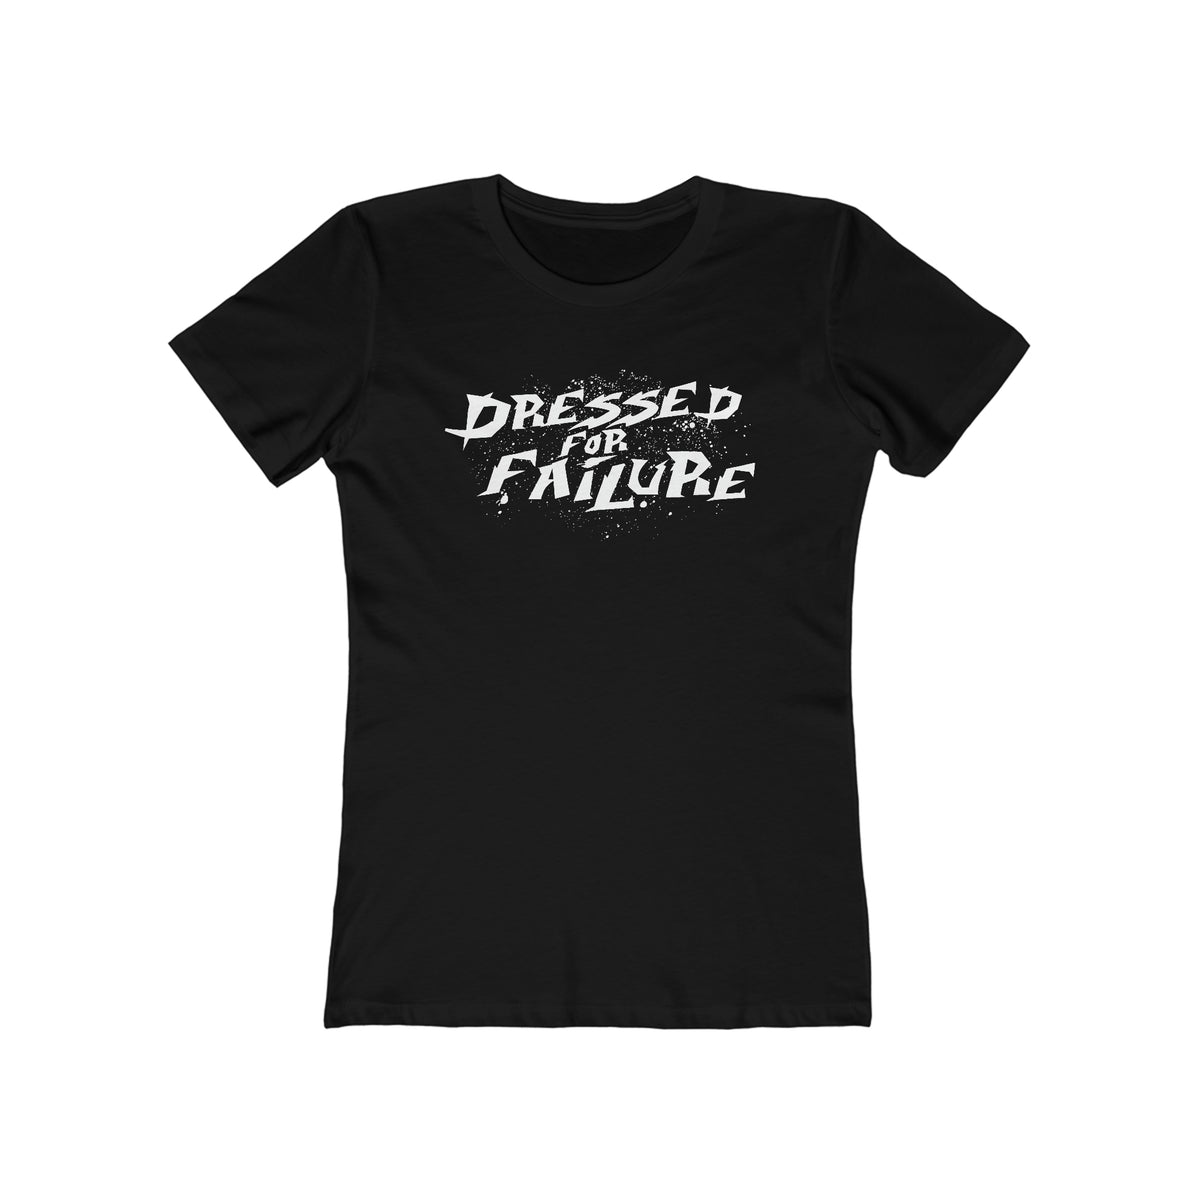 Dressed For Failure - Women’s T-Shirt